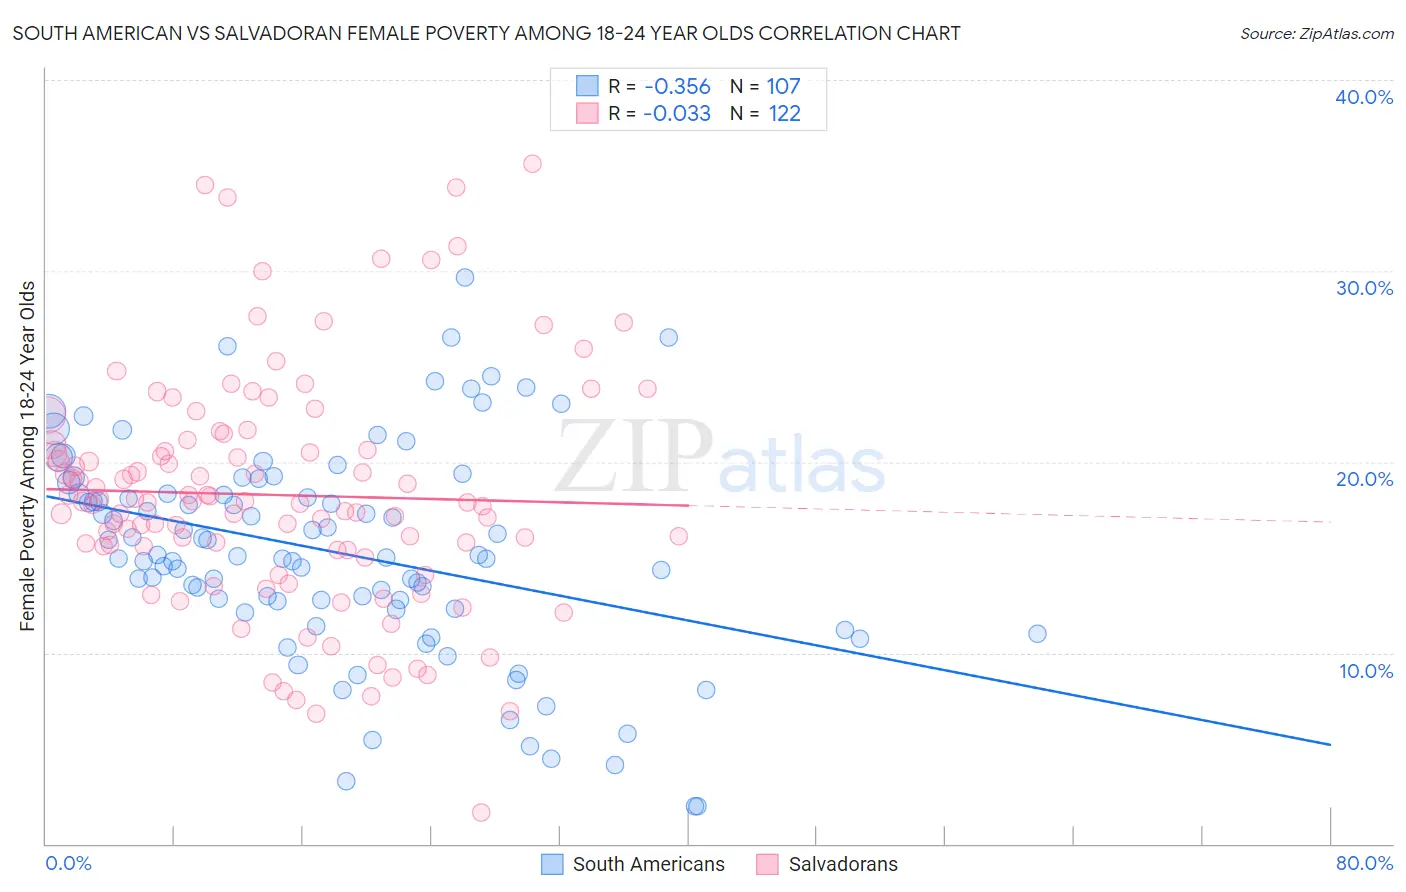 South American vs Salvadoran Female Poverty Among 18-24 Year Olds